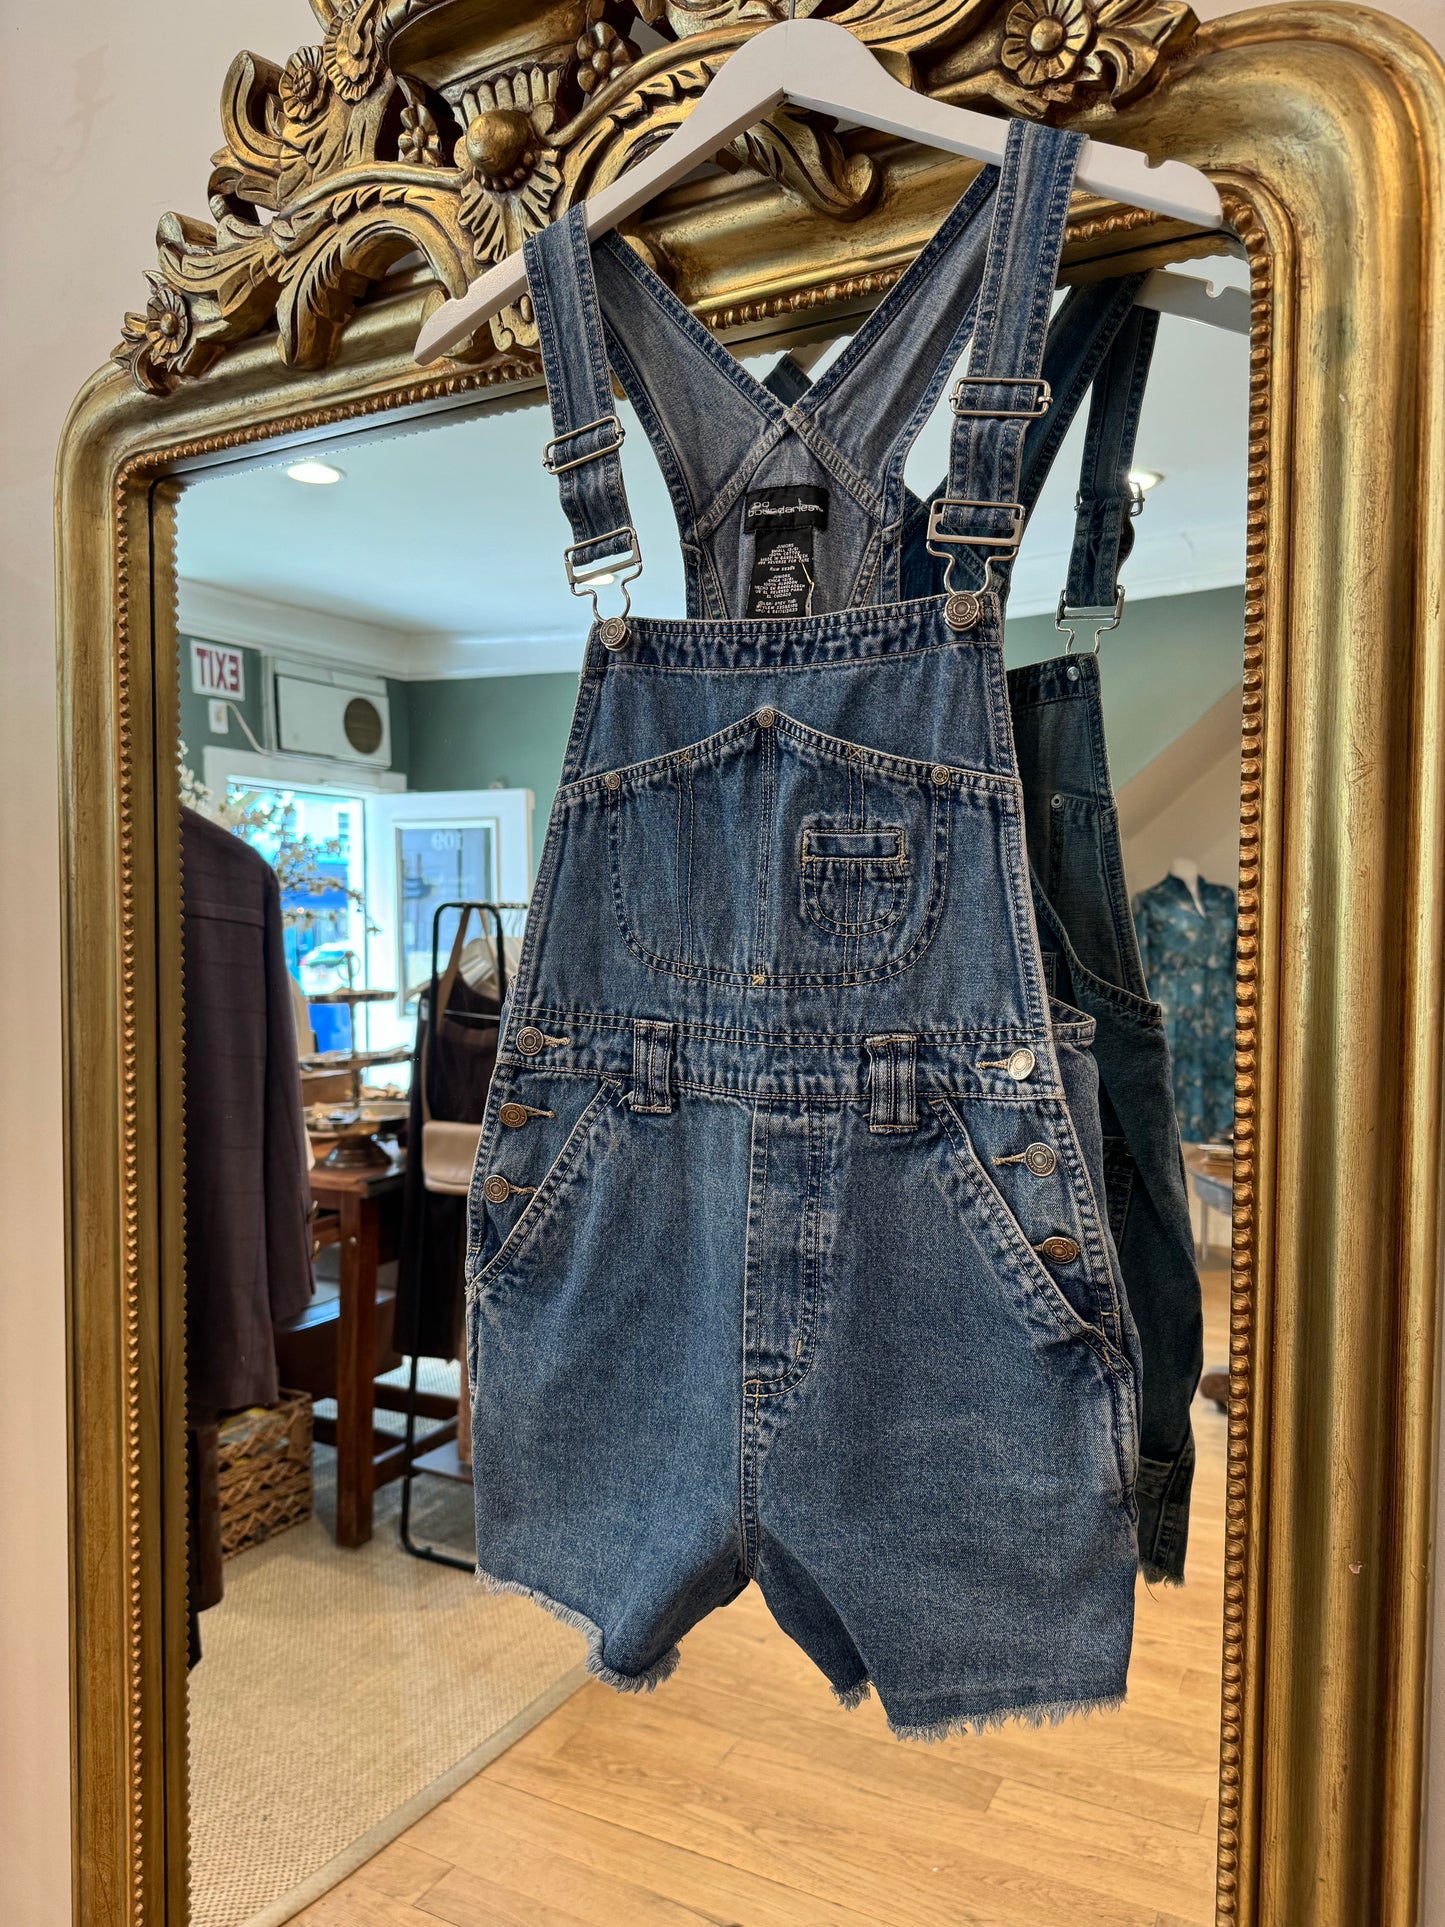 Holly Overalls, 2000’s, 32” Waist